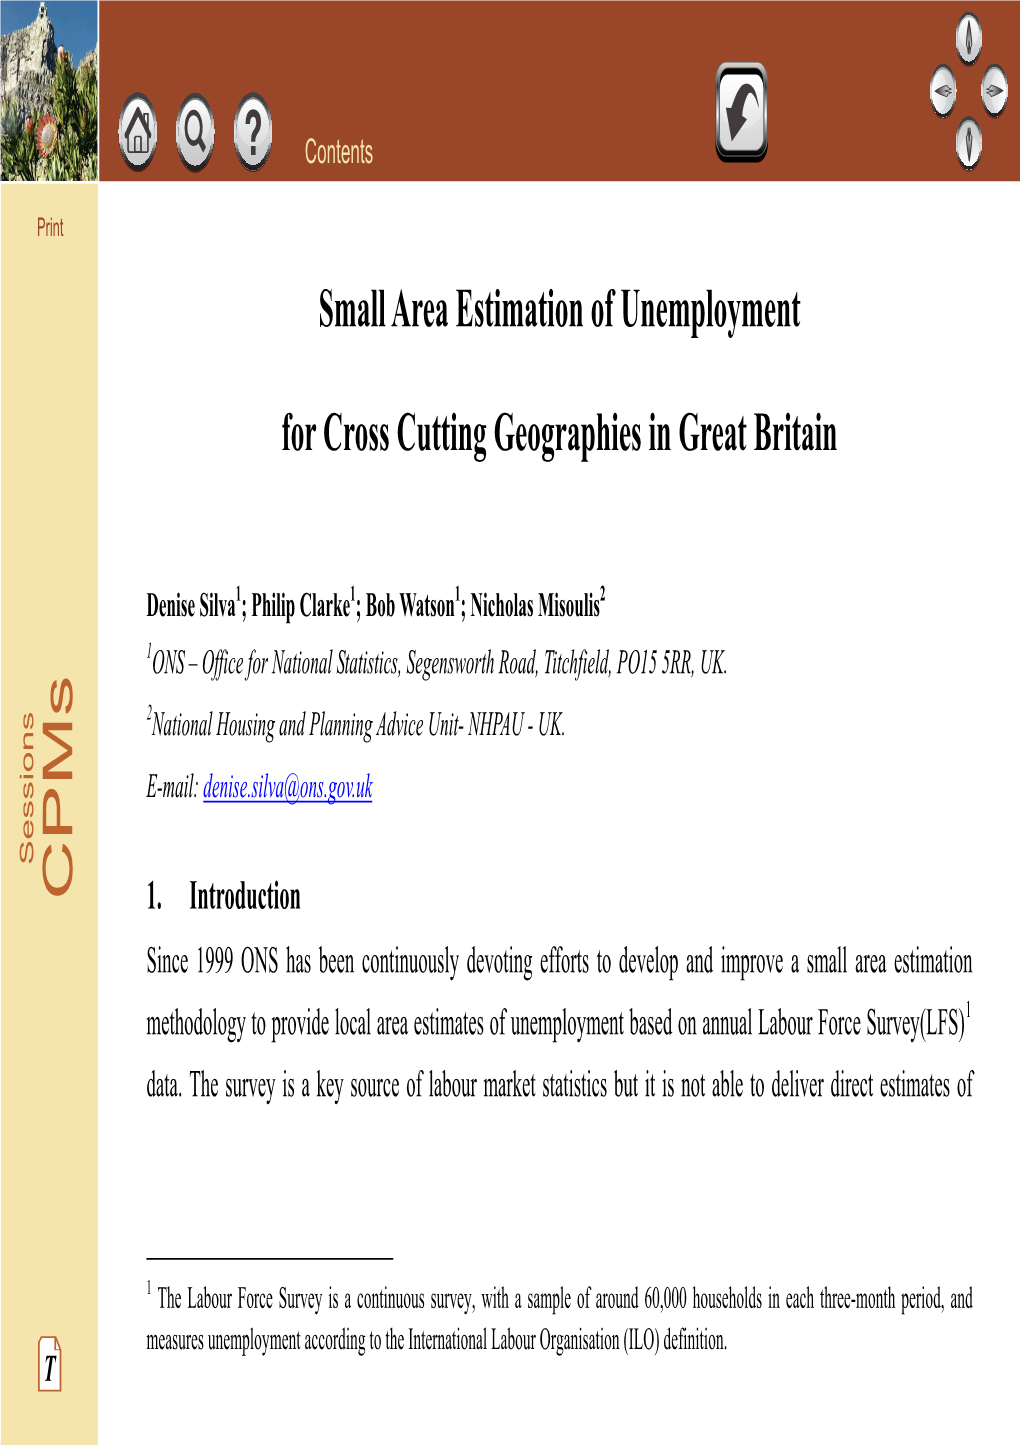 Small Area Estimation of Unemployment for Cross Cutting